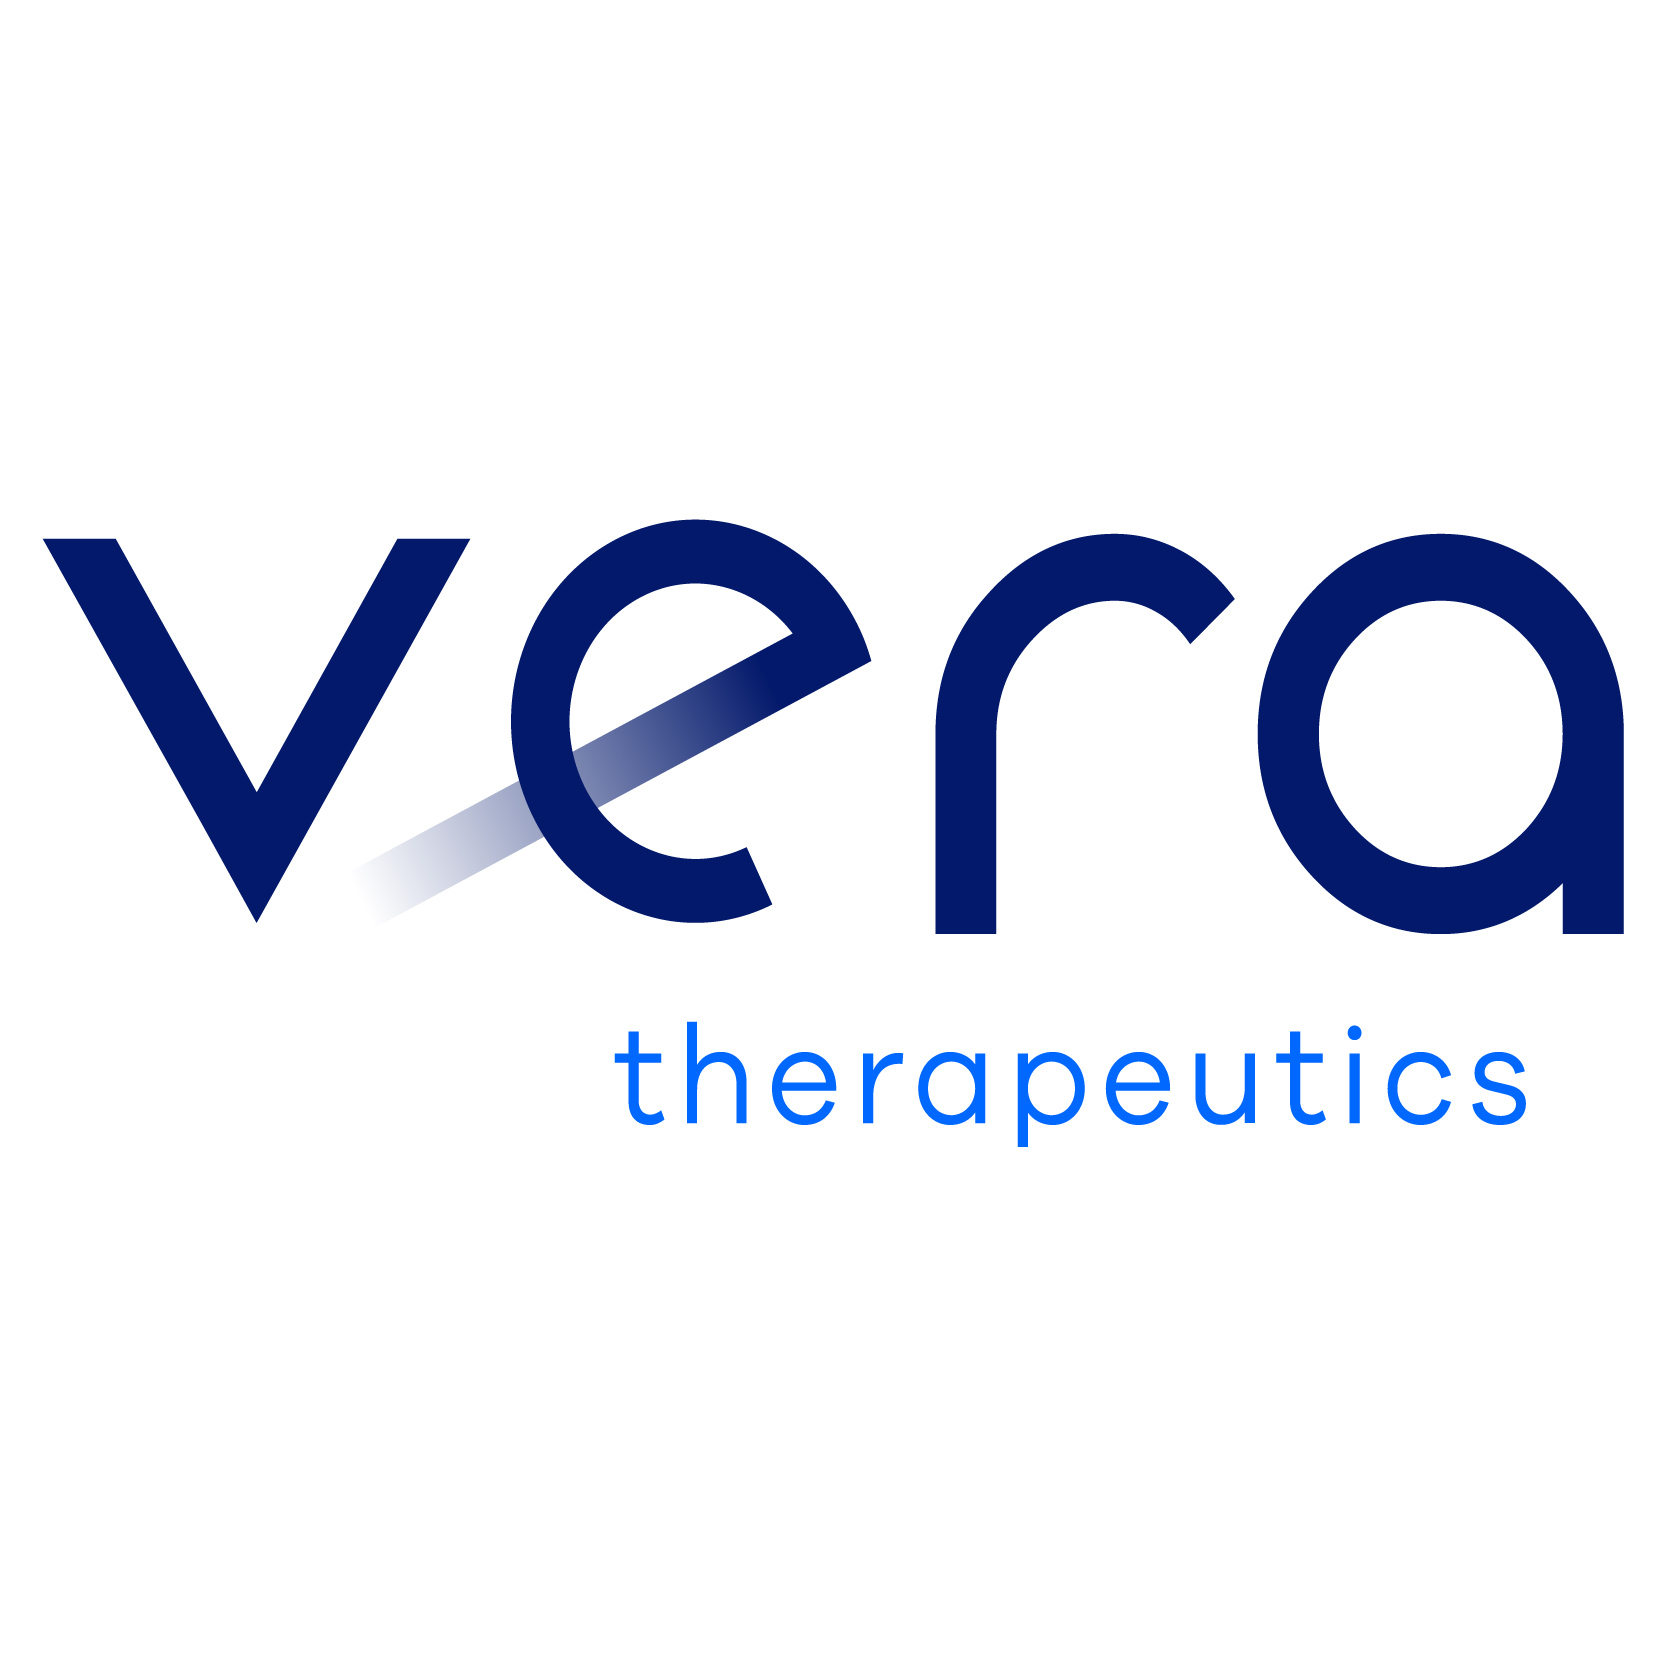 Vera Therapeutics to Present Final Phase 2 Results of MAU868 in Kidney Transplant Recipients with Reactivated BK Virus Infection and New Analysis of Phase 2a JANUS Trial of Atacicept in IgA Nephropathy at the American Society of Nephrology Kidney We